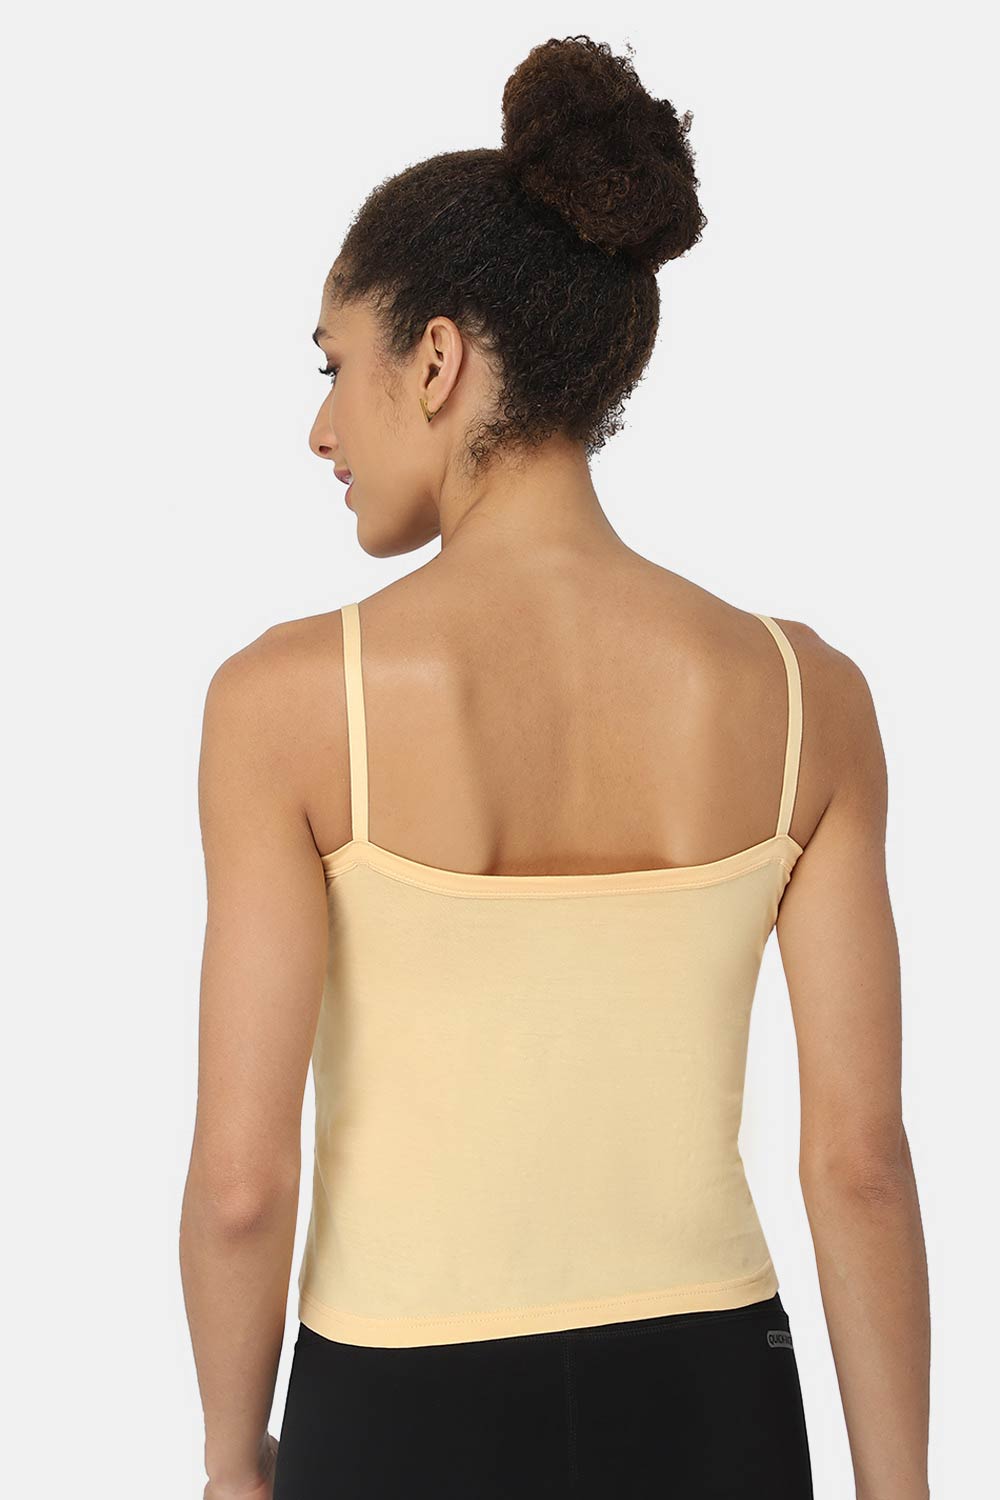 Intimacy Camisole-Slip Special Combo Pack - In05 - Pack of 3 - C52